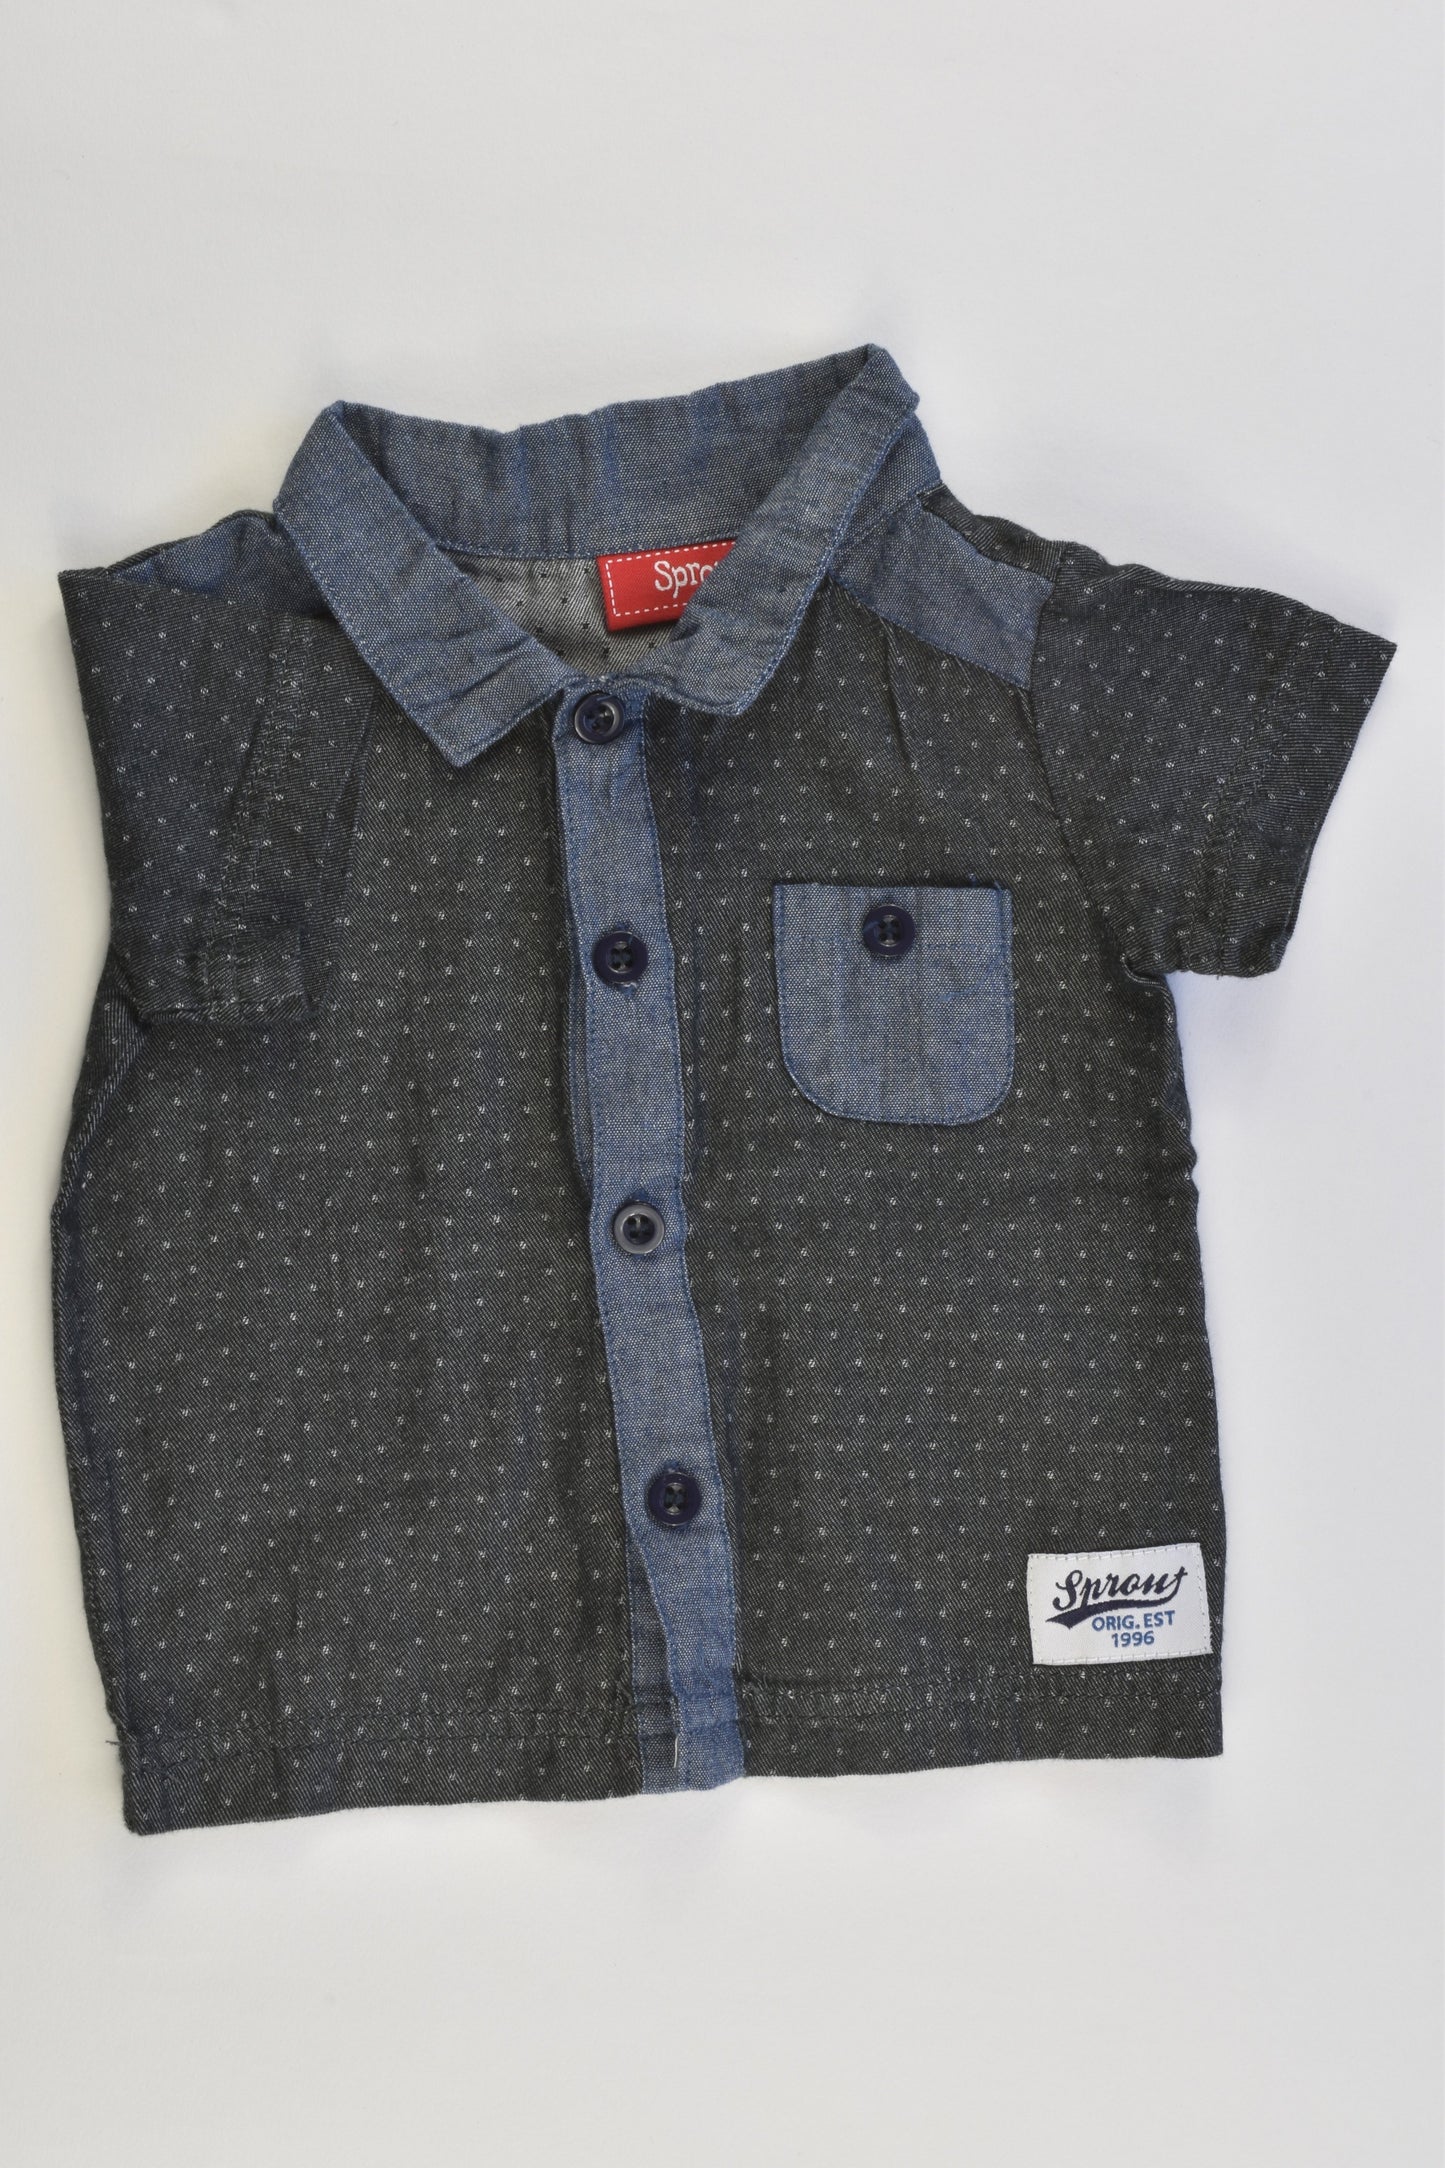 Sprout Size 00 Collared Shirt